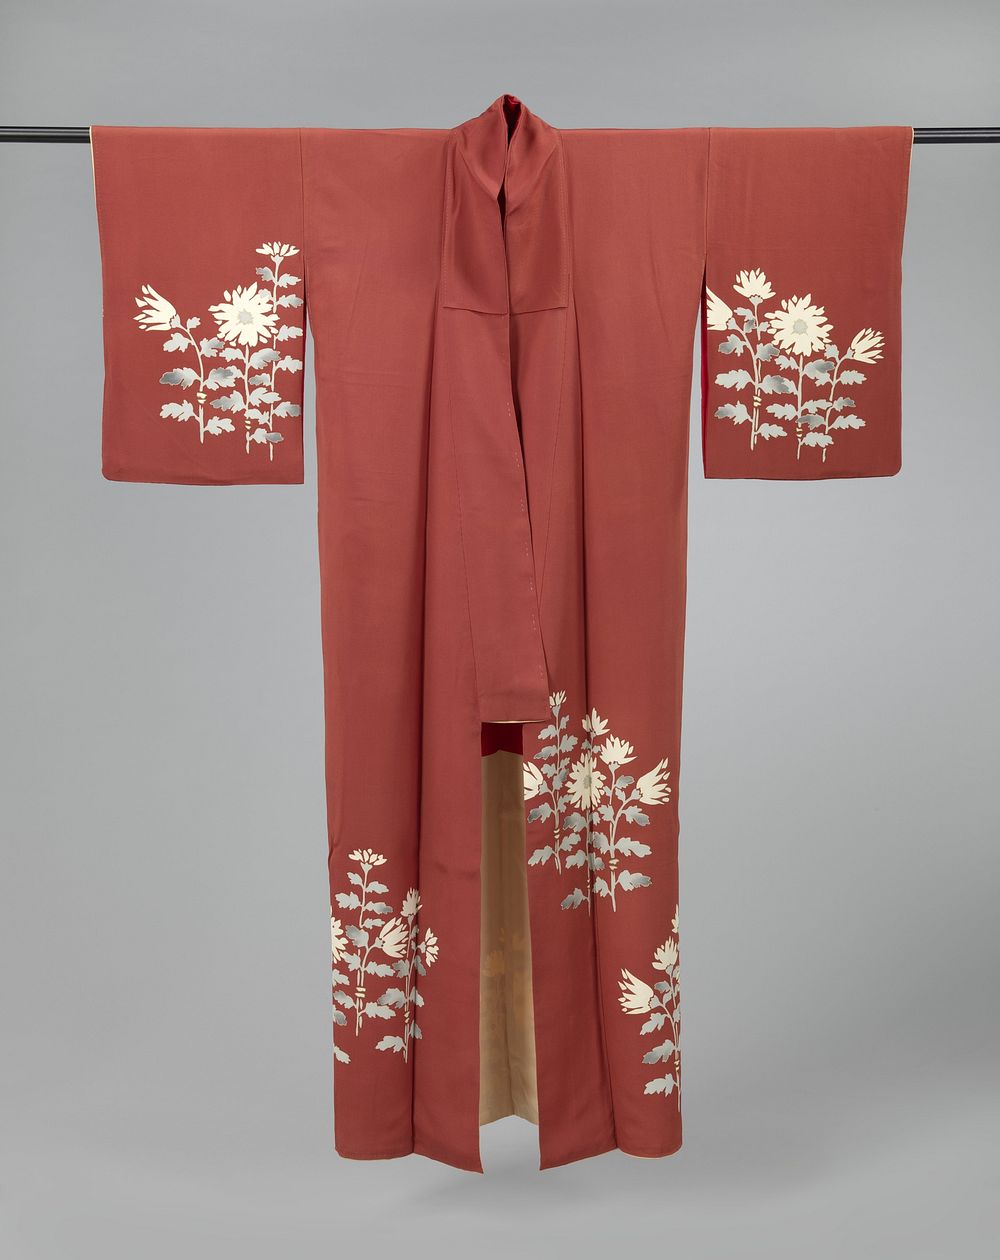 Women’s kimono decorated with chrysanthemums (1920 - 1940) by anonymous